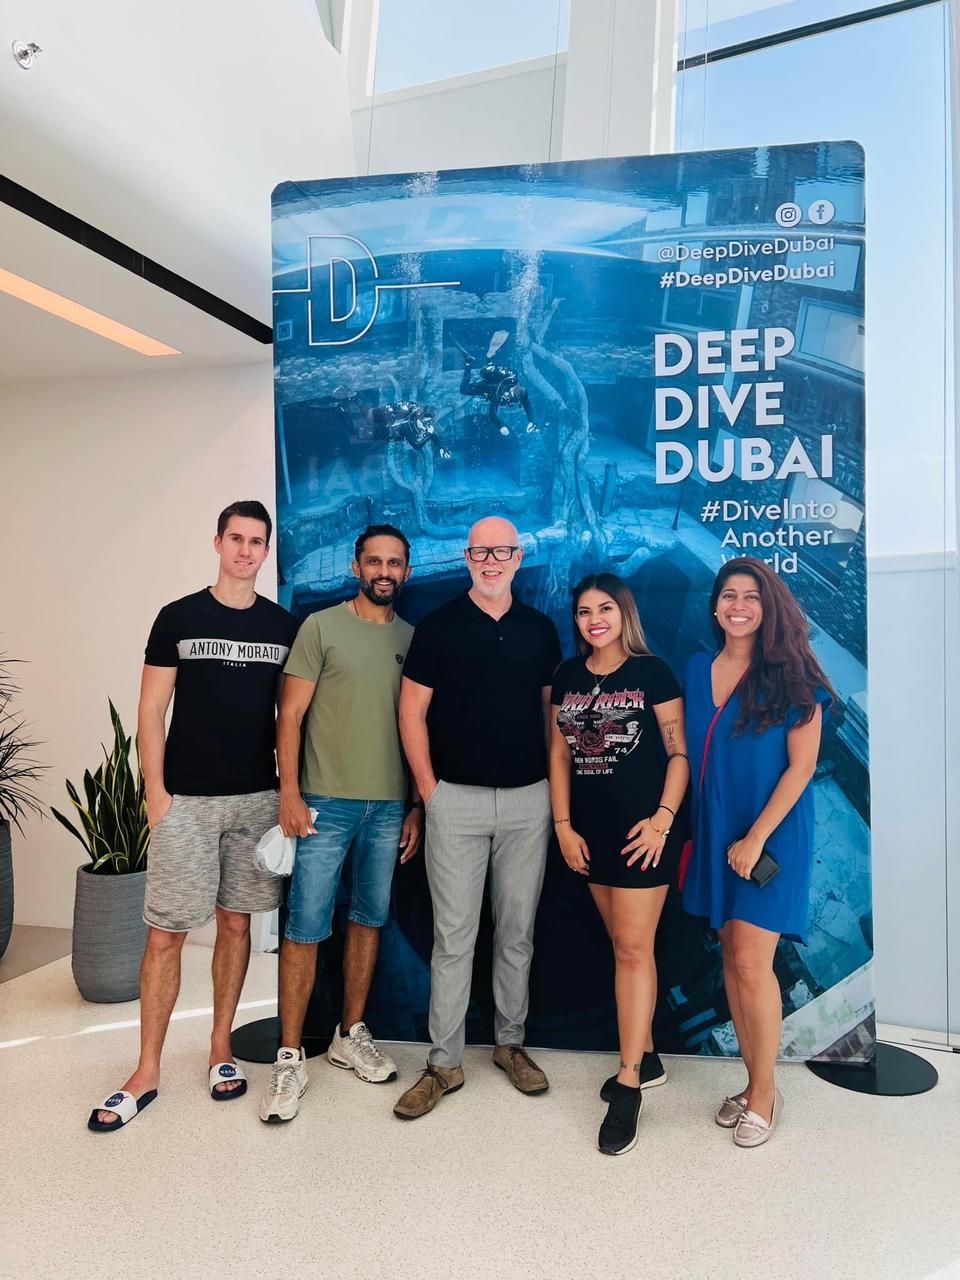 Deep Dive Dubai Challenge yourself to the deepest pool in the world